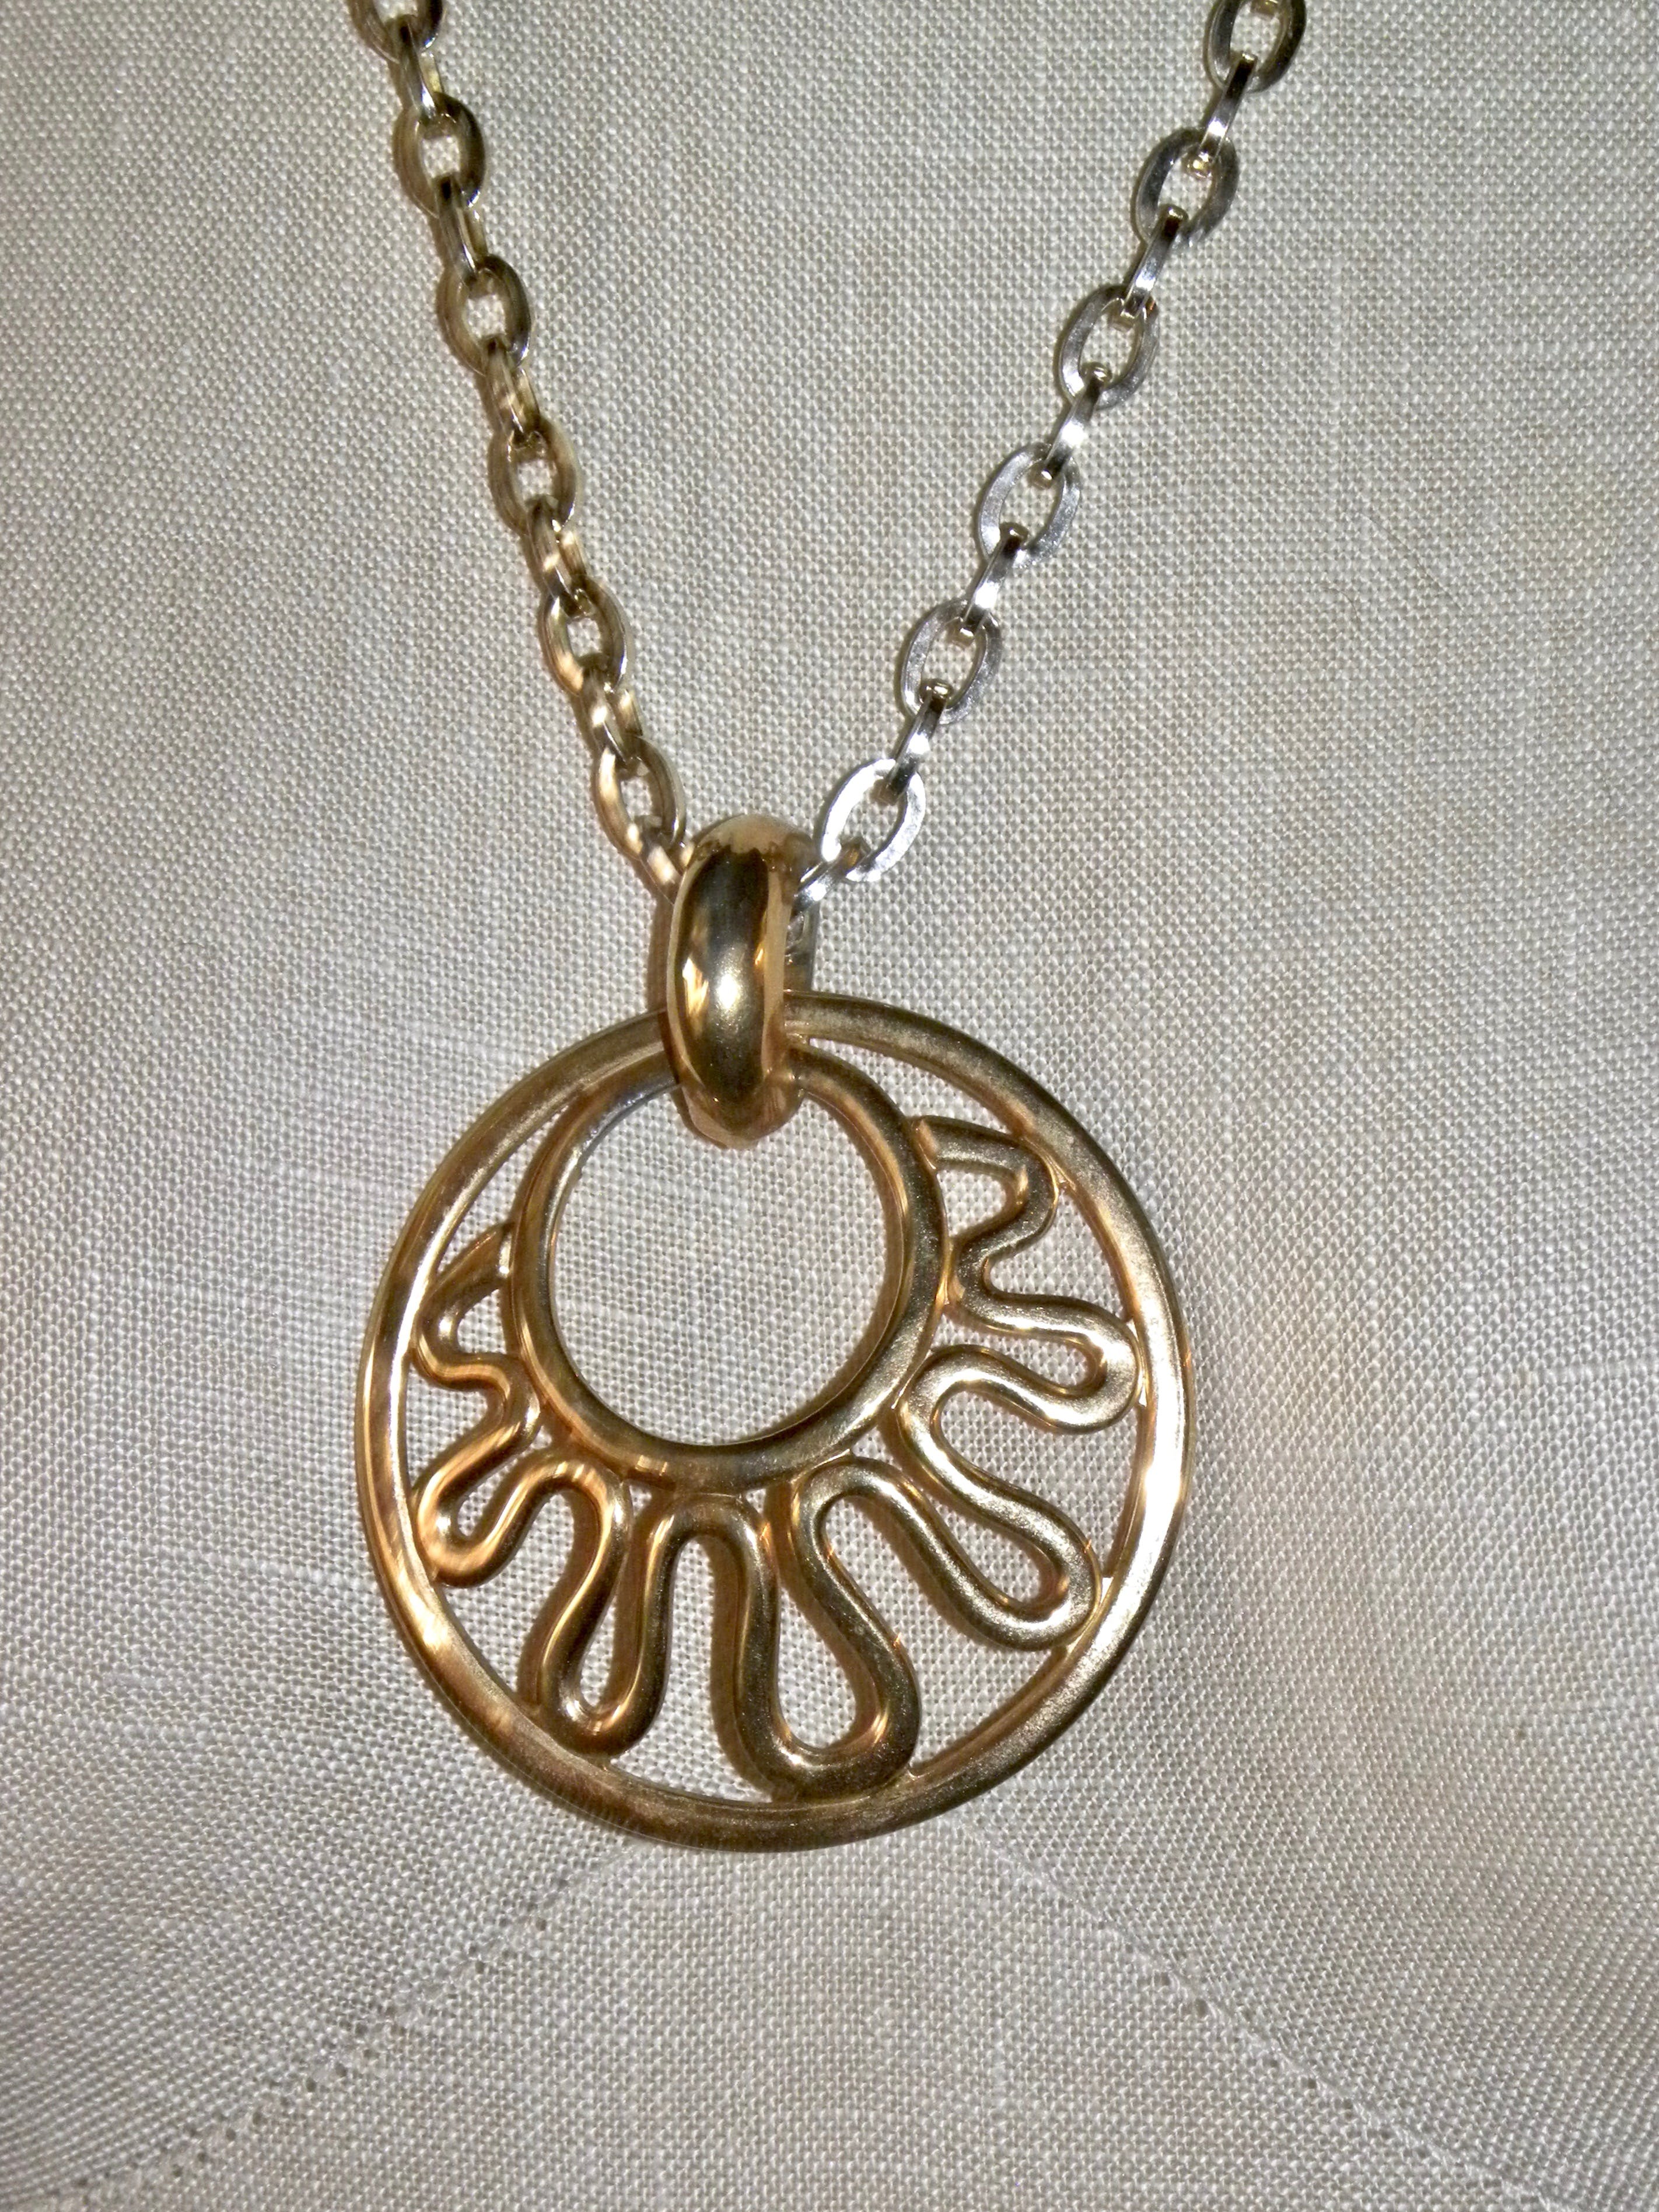 Vintage 70's Mod Large Abstract Sun Pendant Necklace by Sarah Coventry ...